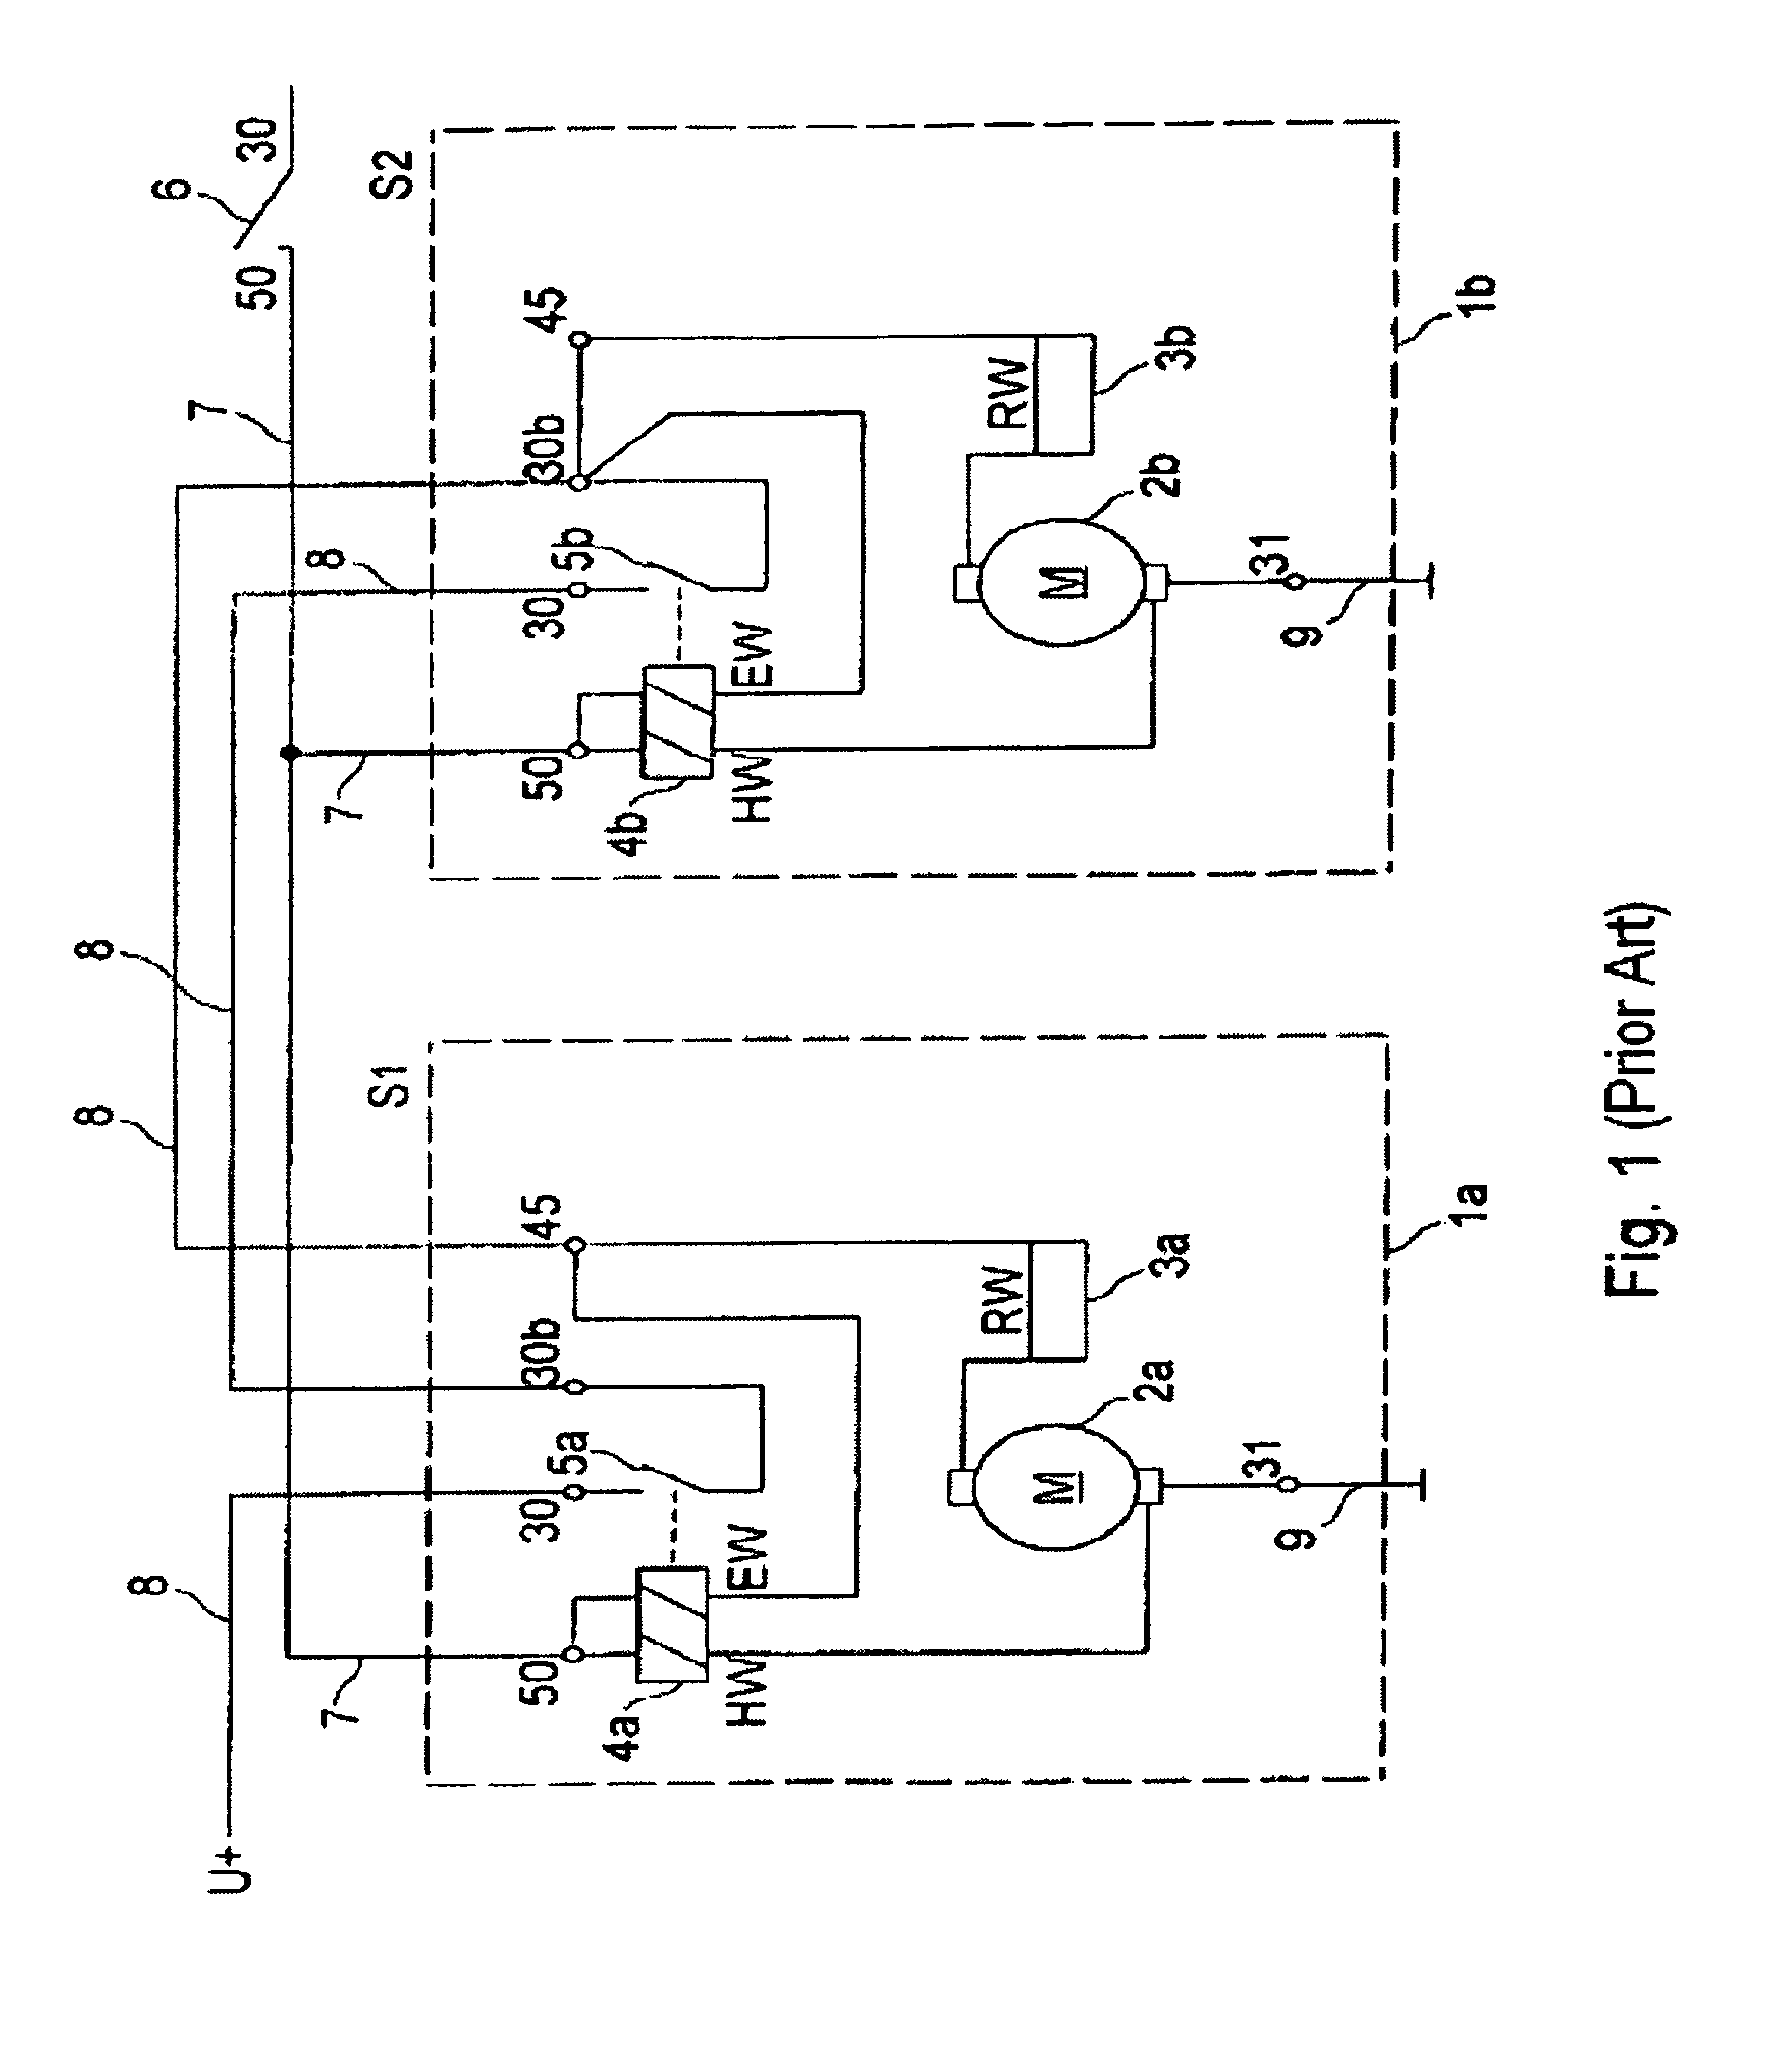 Parallel starting system having a low wiring expenditure